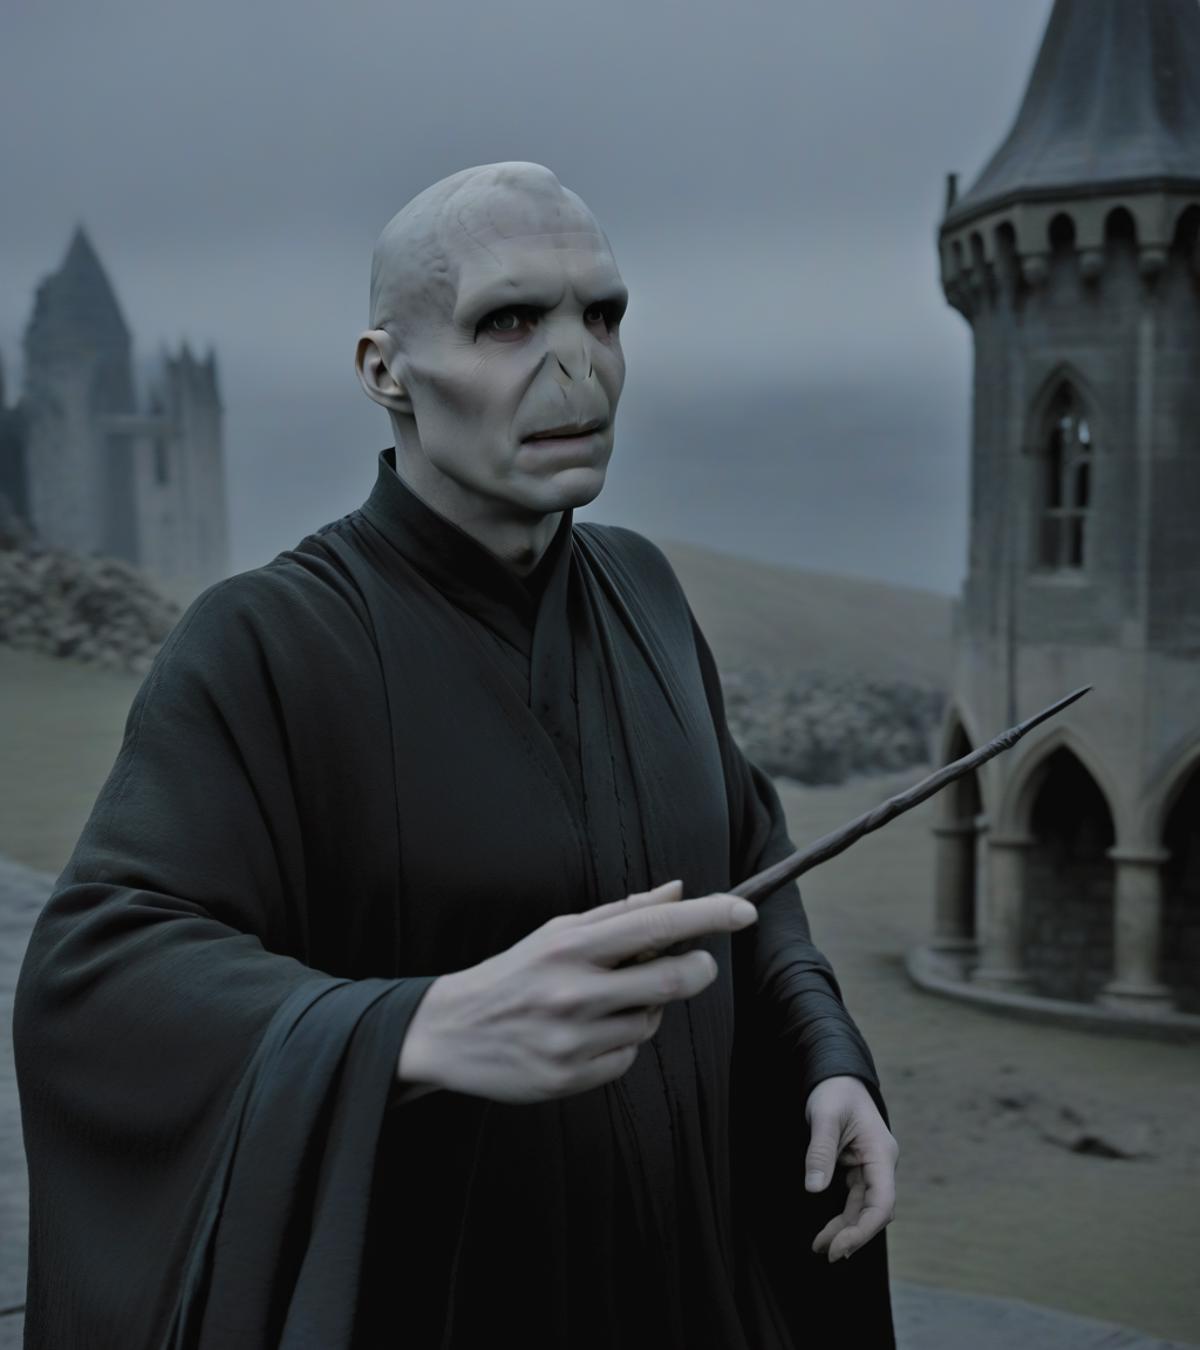 The Dark Lord - Lord Voldemort image by ORNARTS